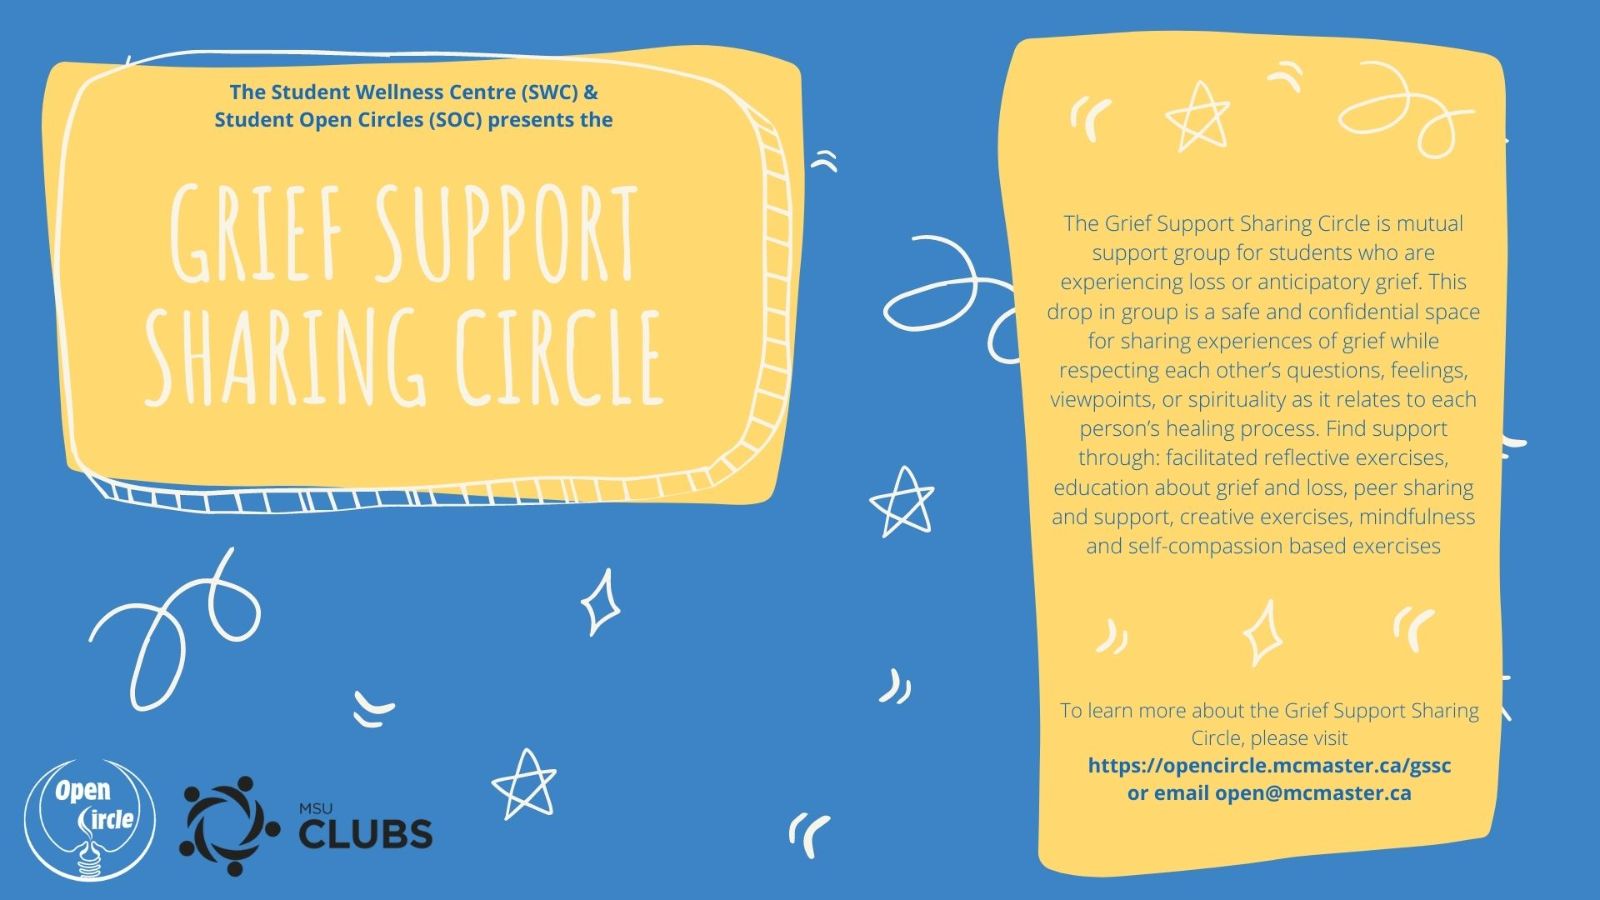 A graphic advertising the grief support sharing circle